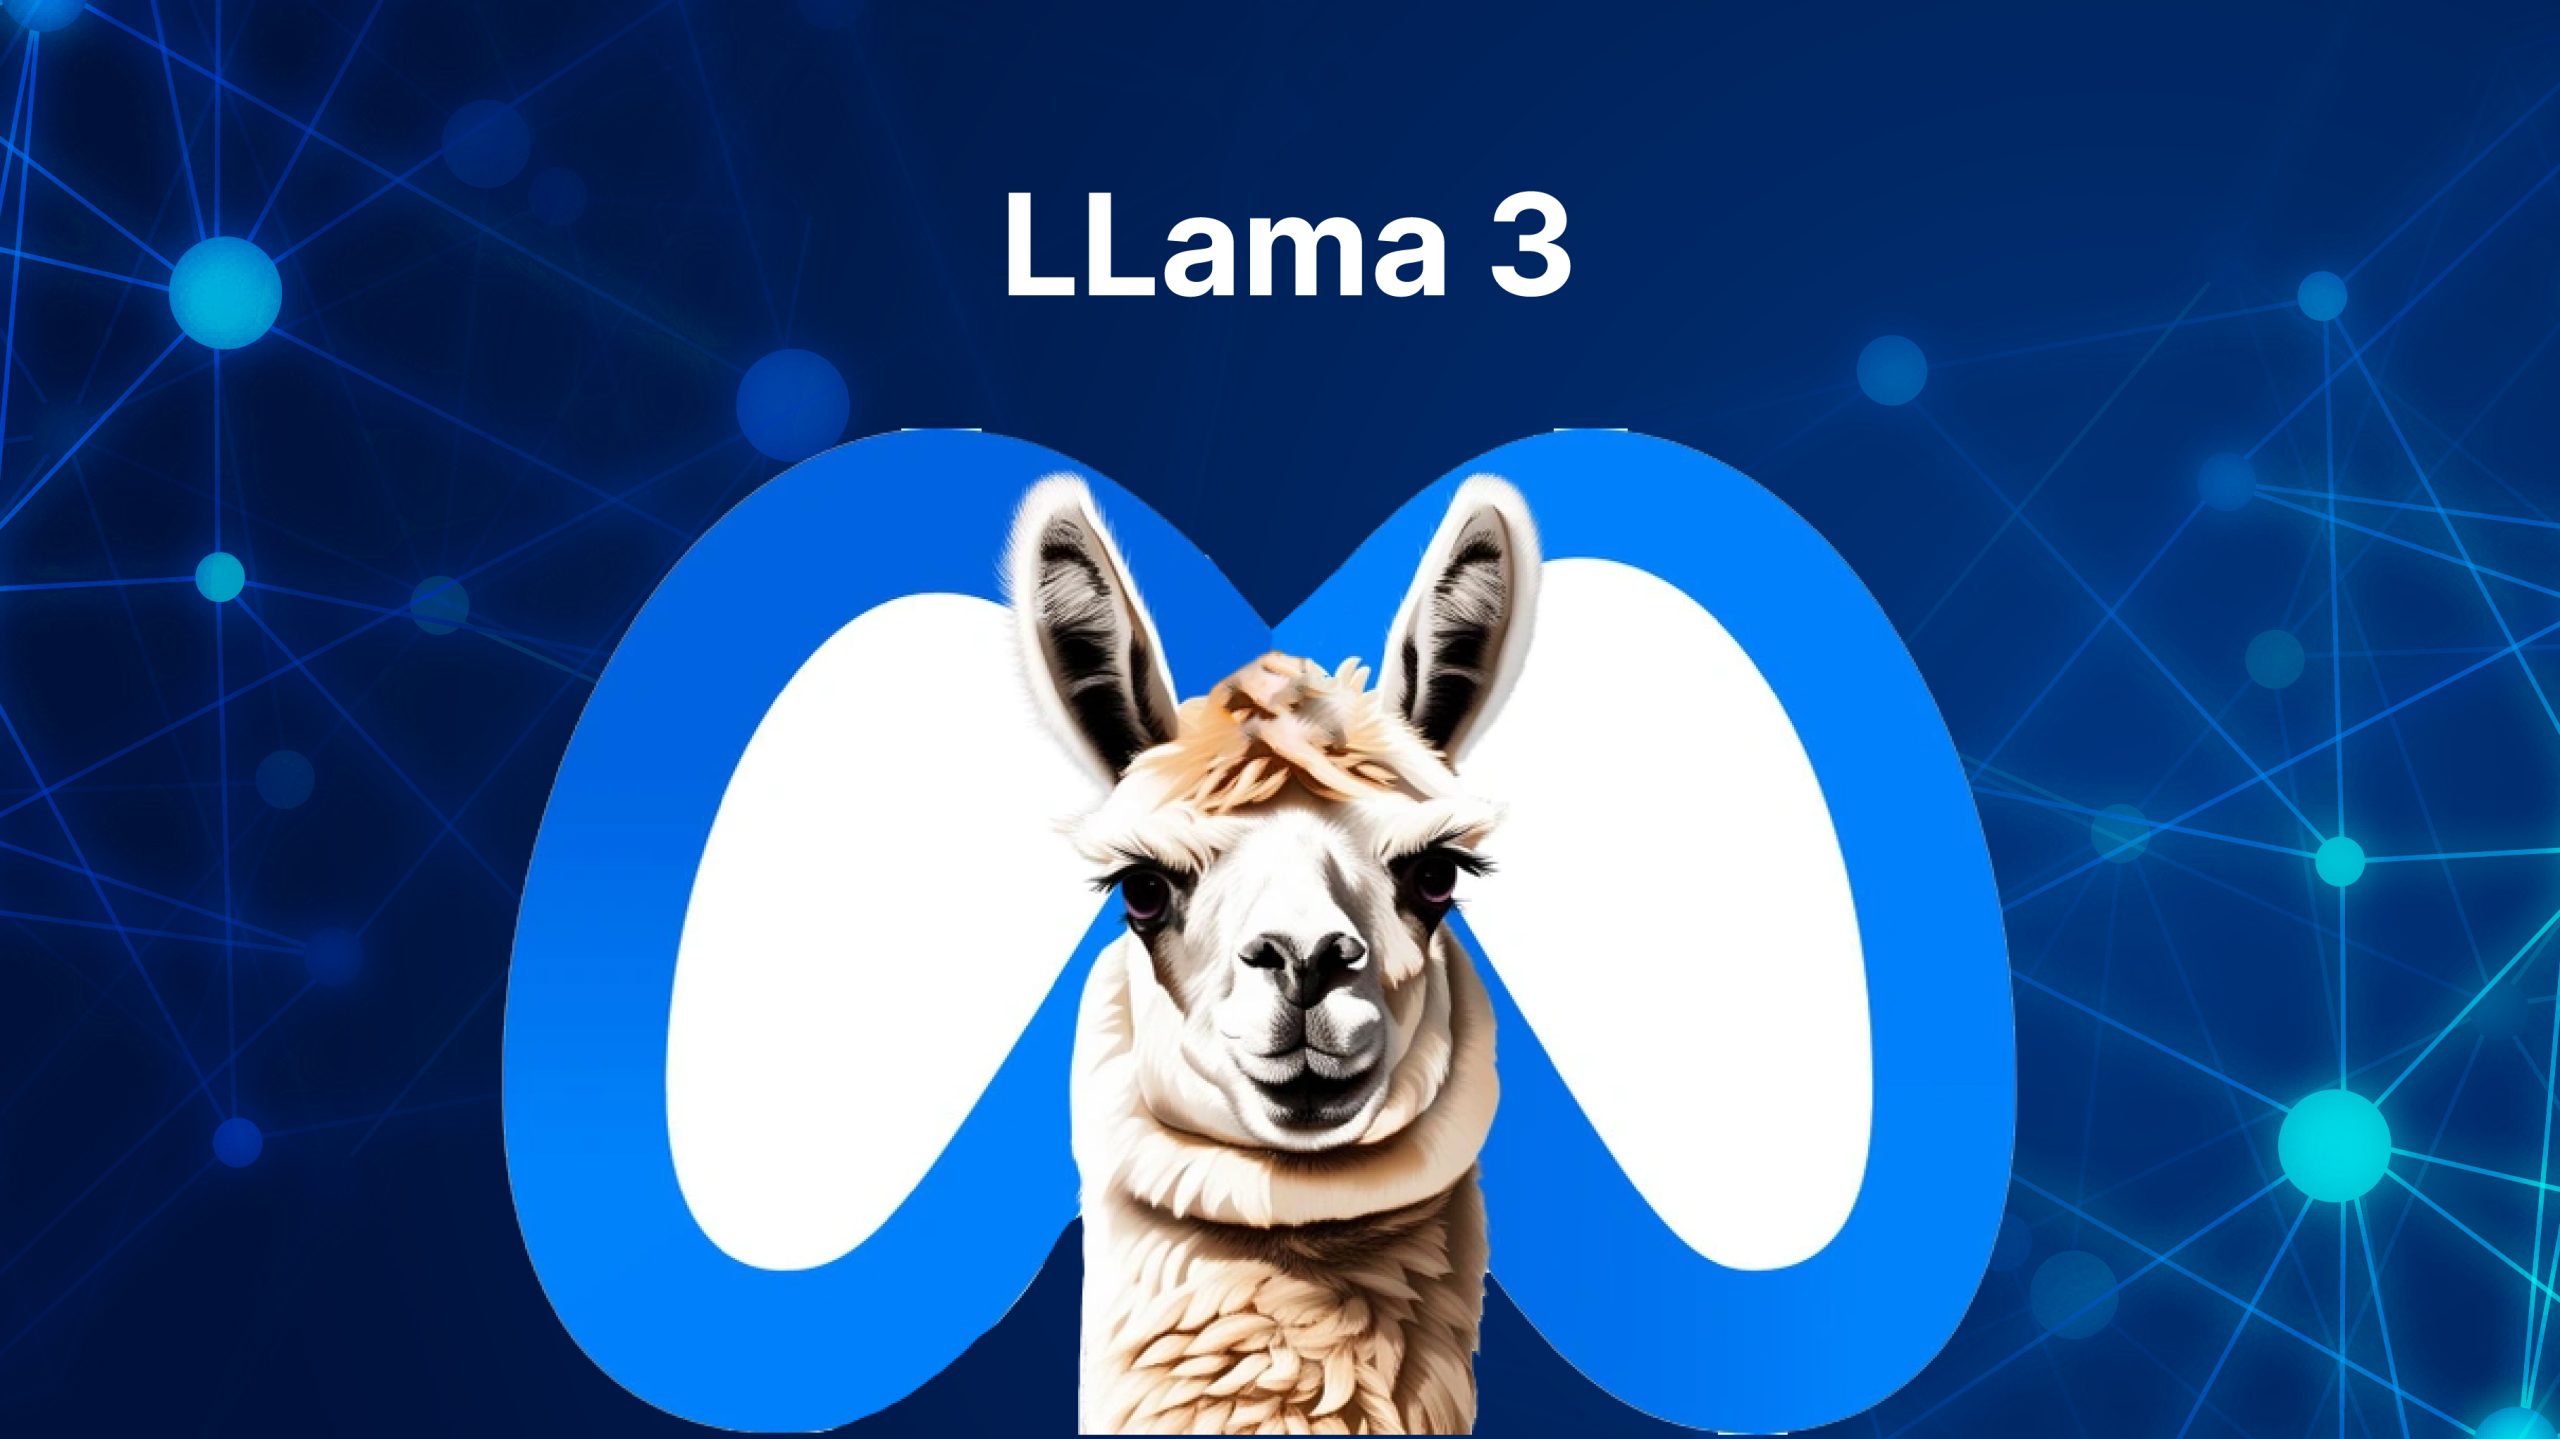 Llama3 is not very censored, NSFW AI is being treated more leniently?